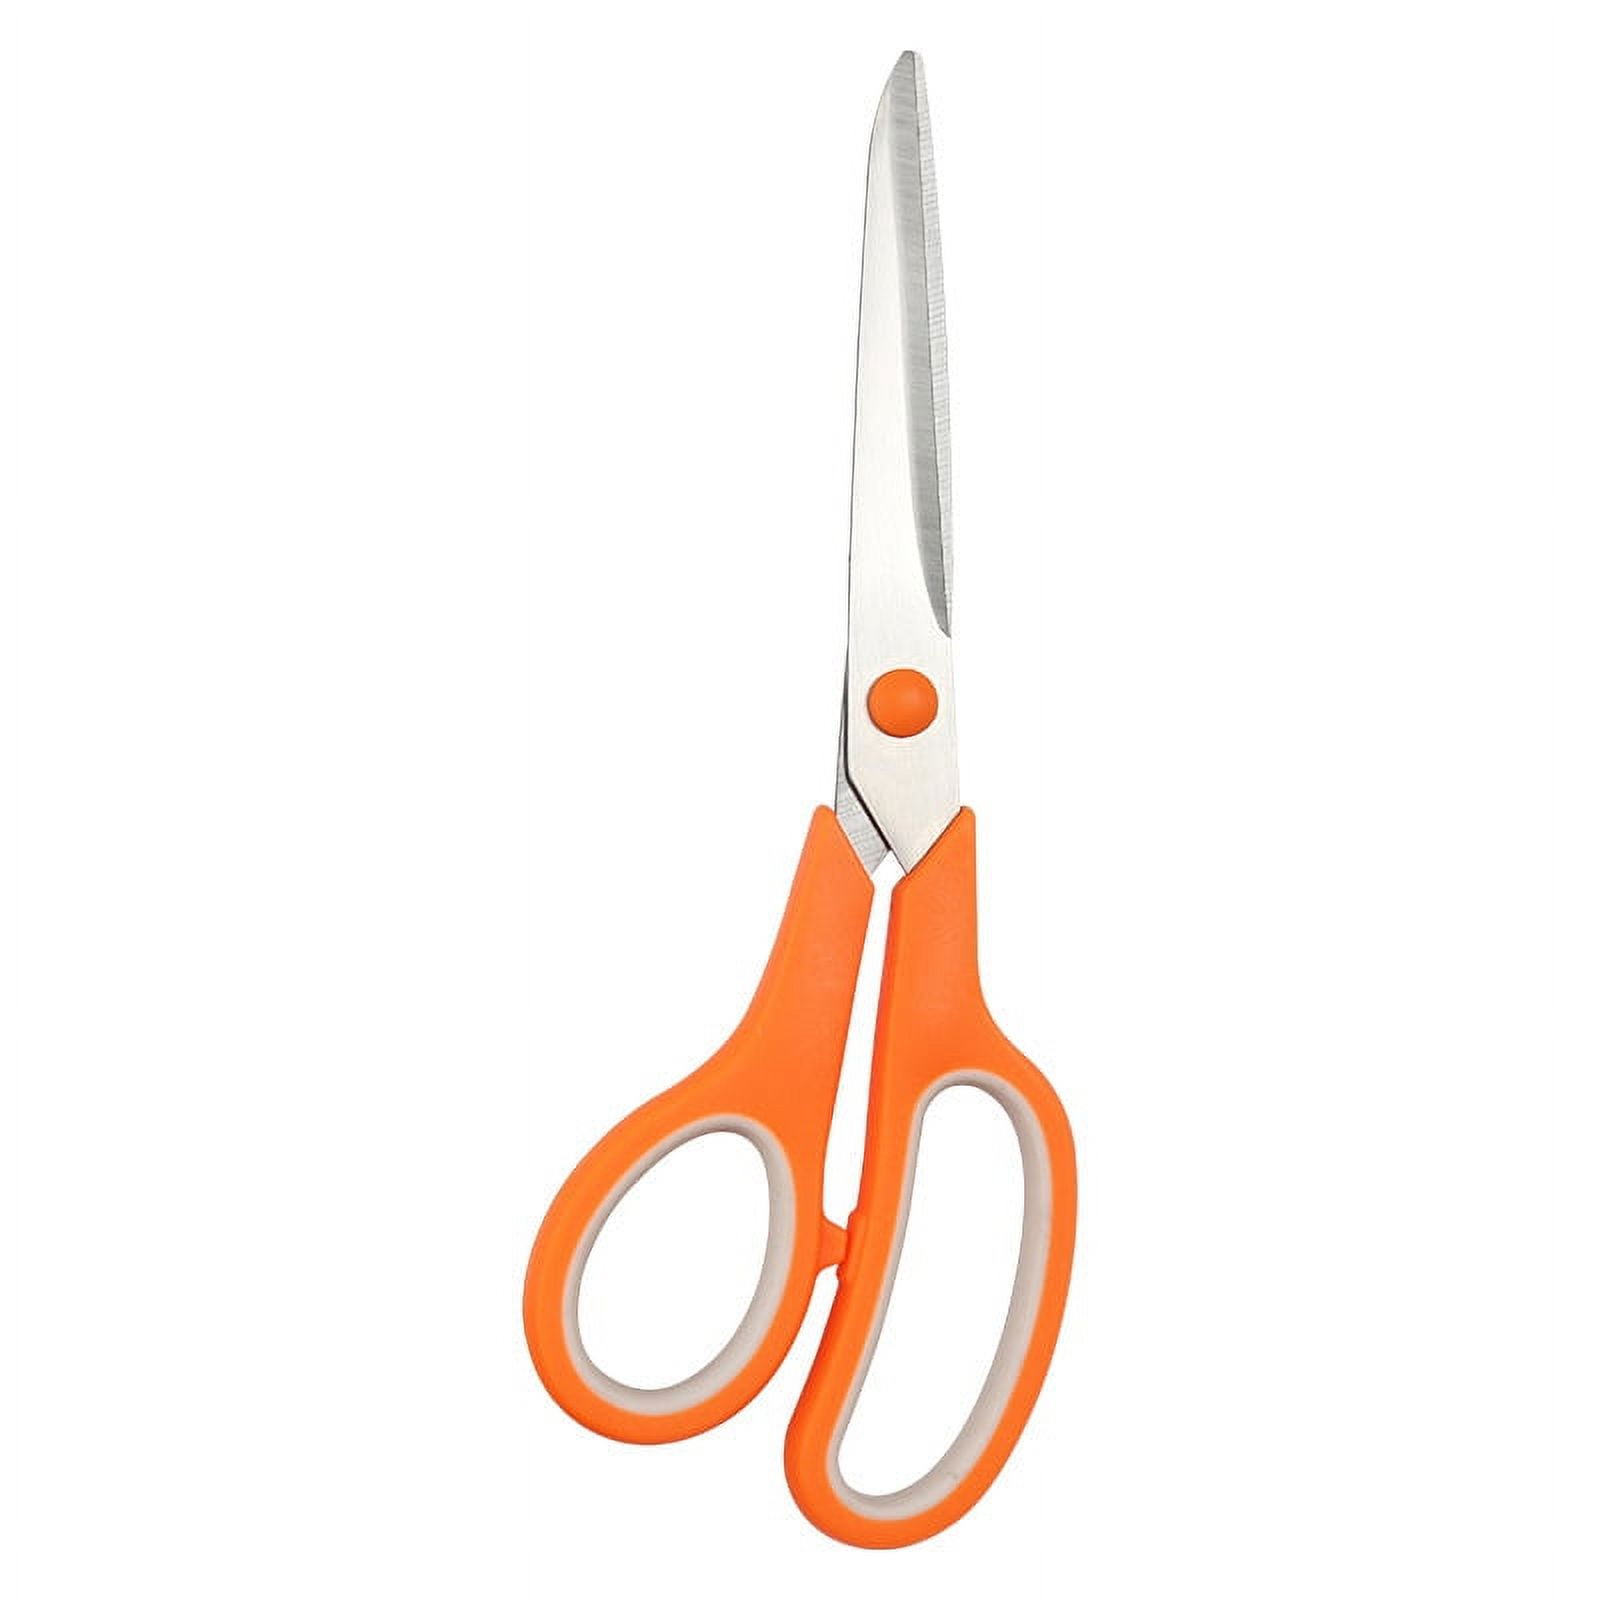 Wiss 064SP 4 Pocket Double Round Safety Point Scissors Italy 